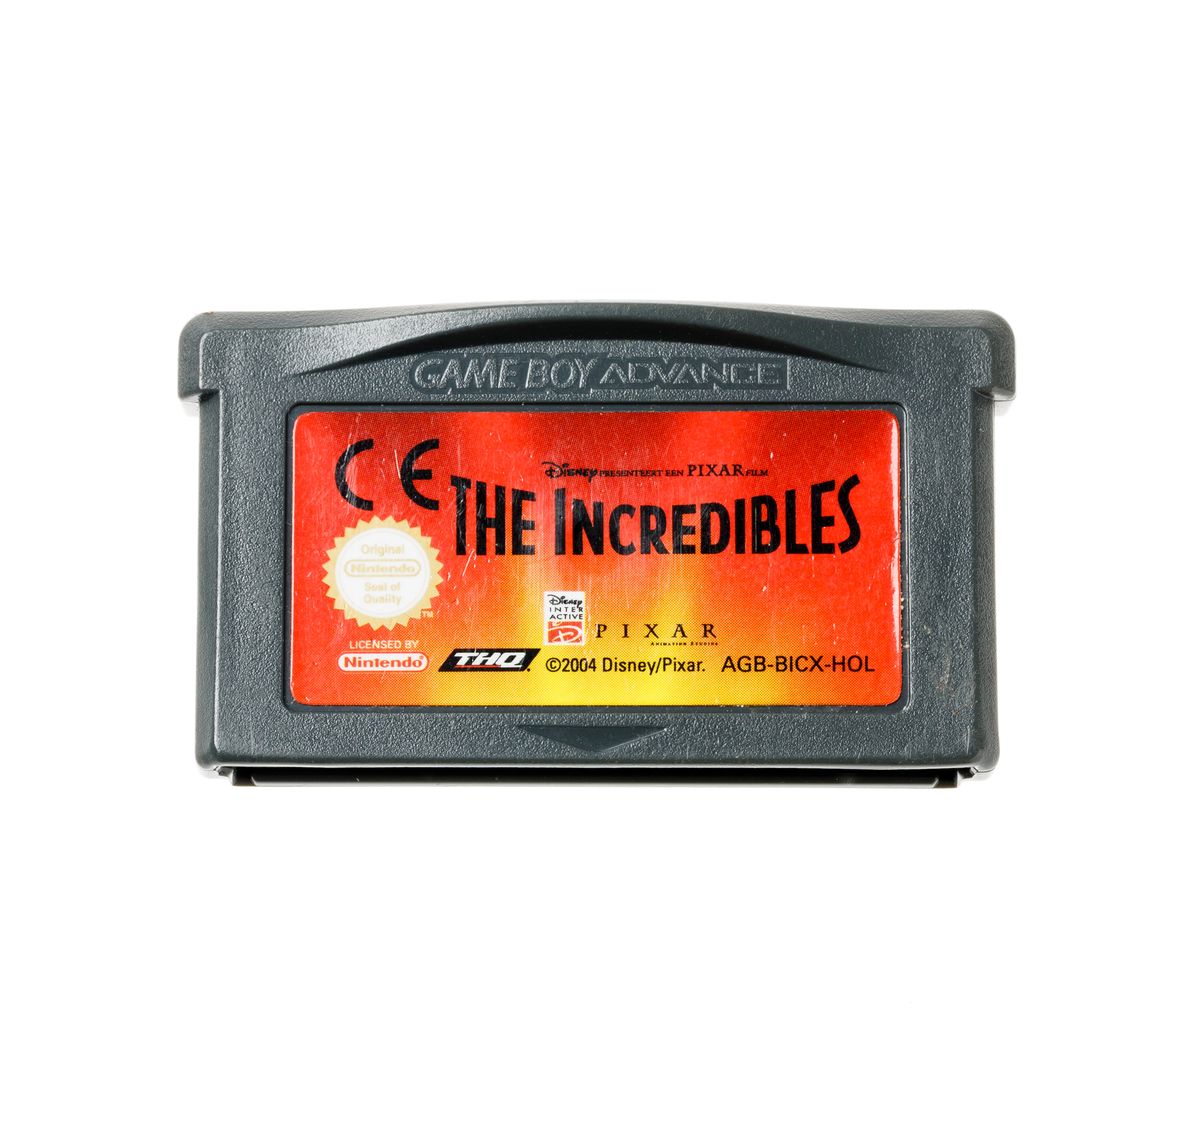 The Incredibles - Gameboy Advance Games